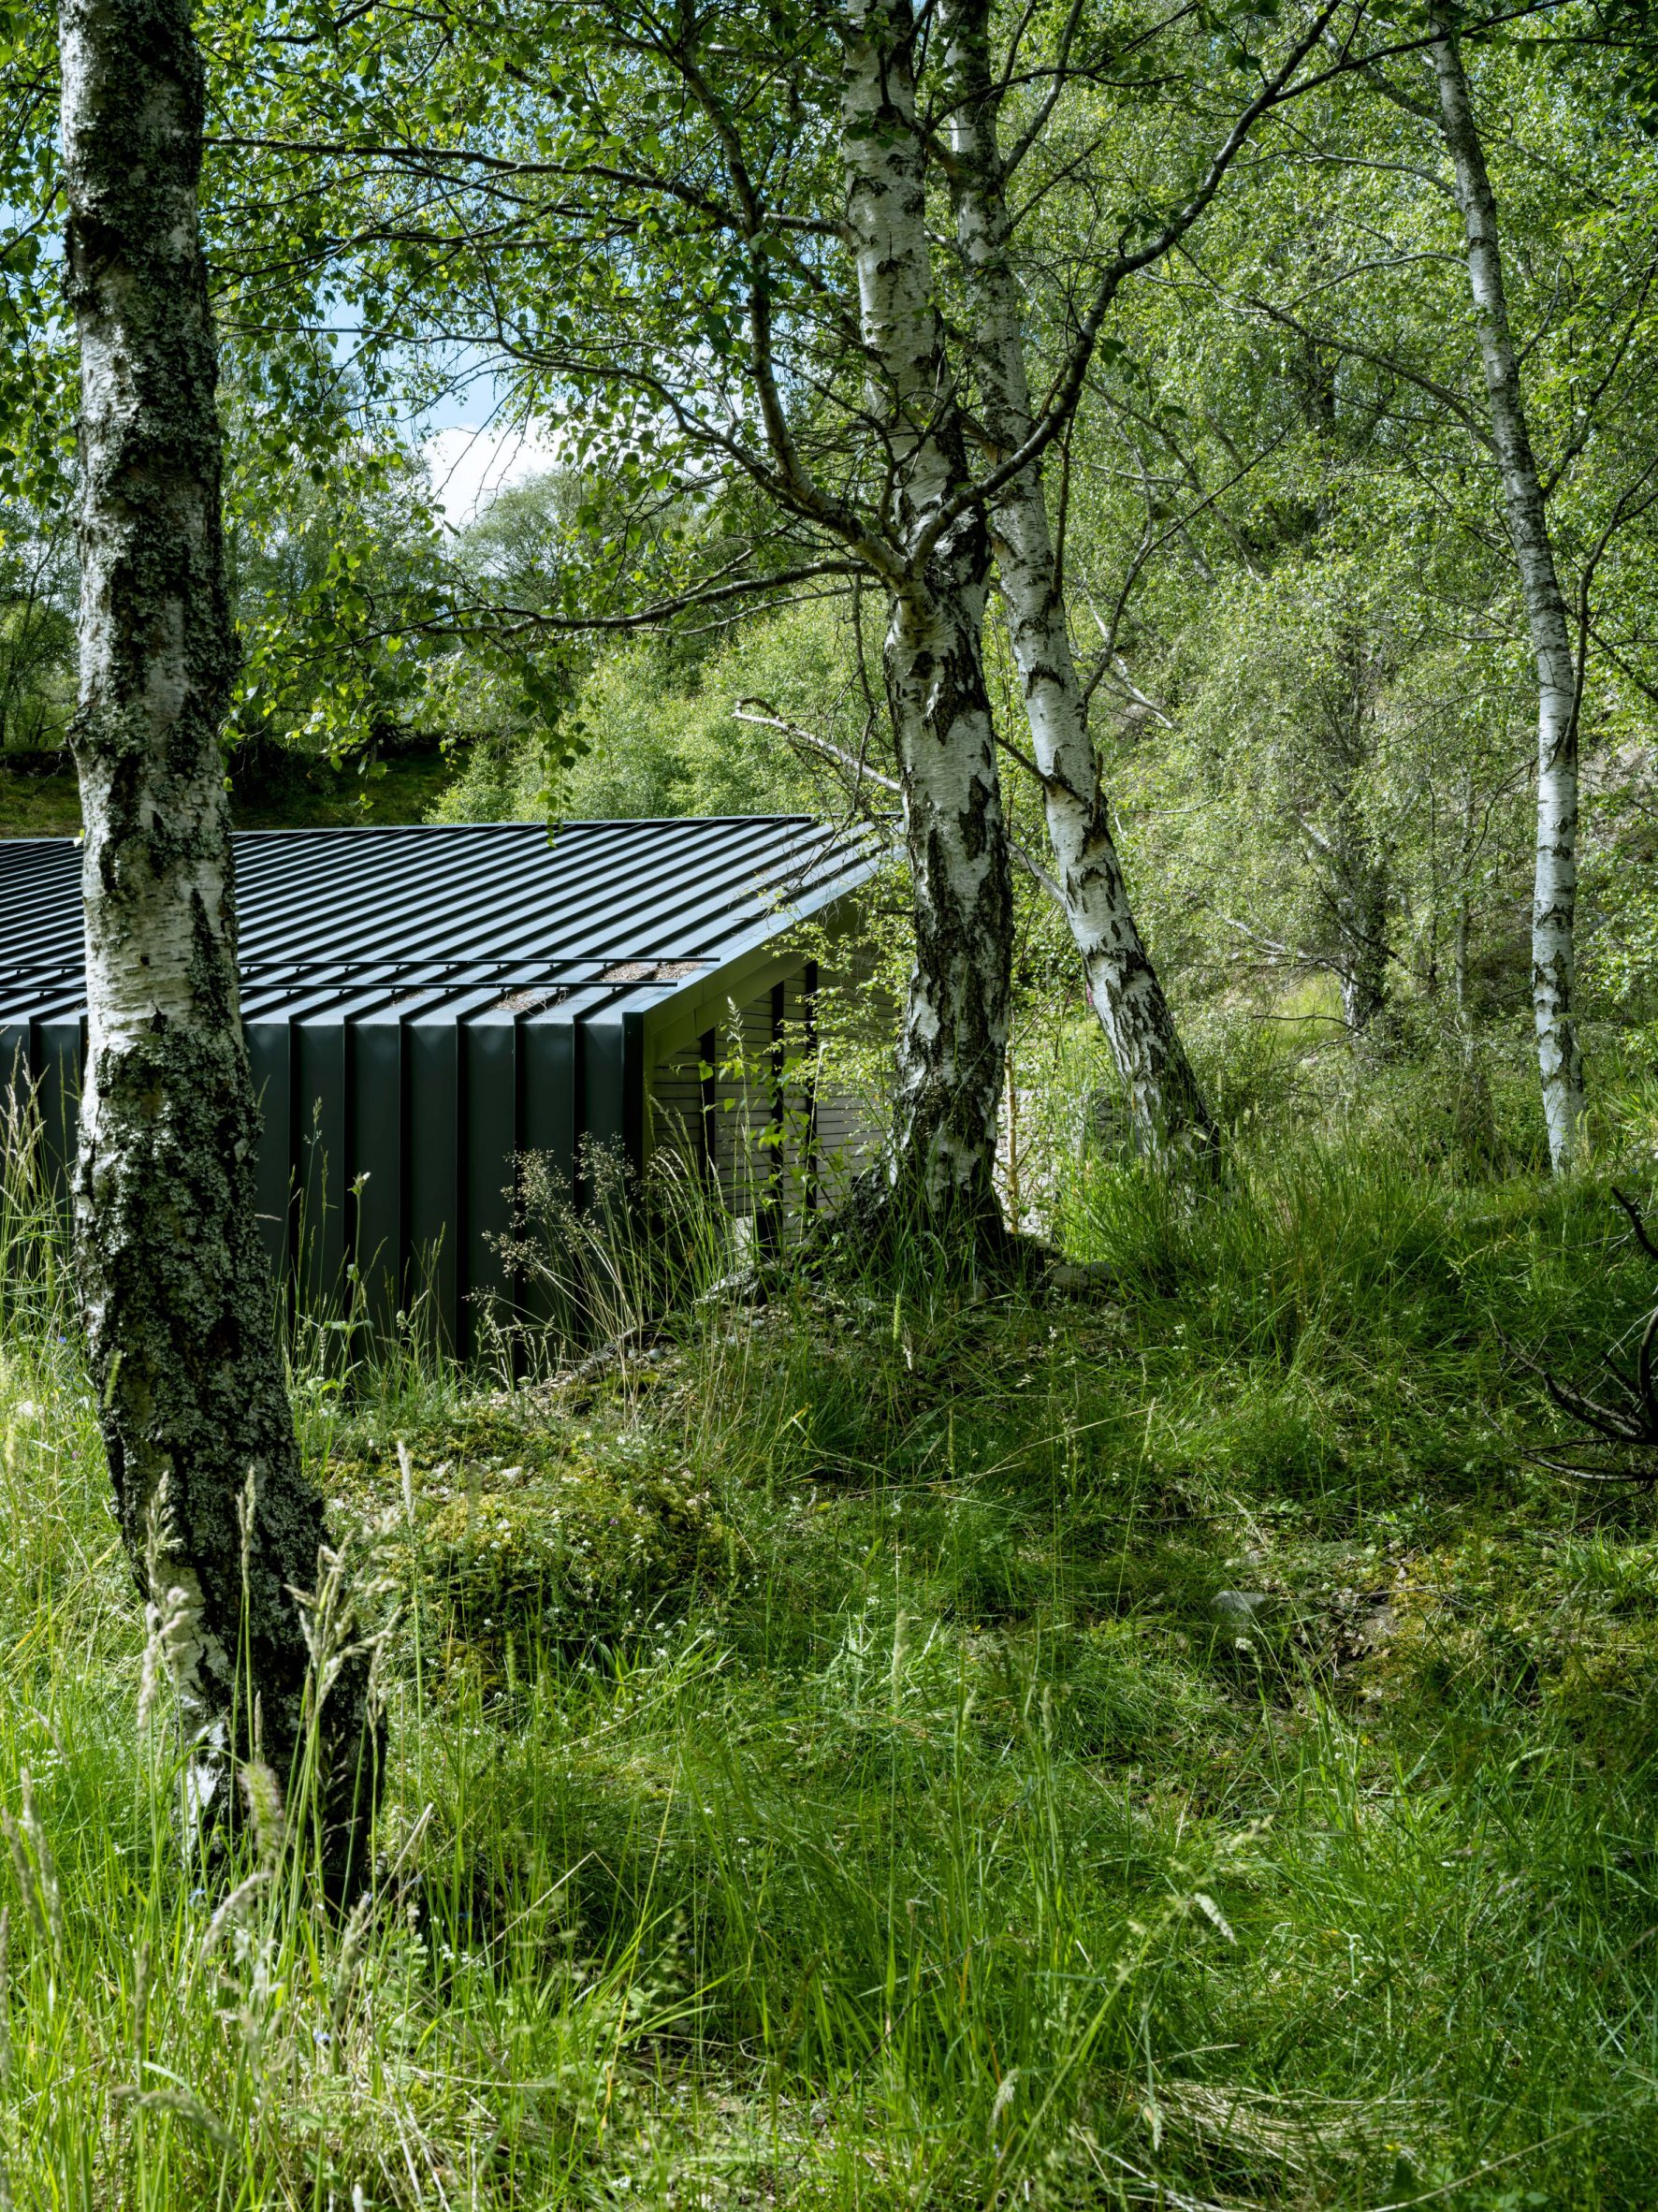 Office in former quarry surrounded by woodland